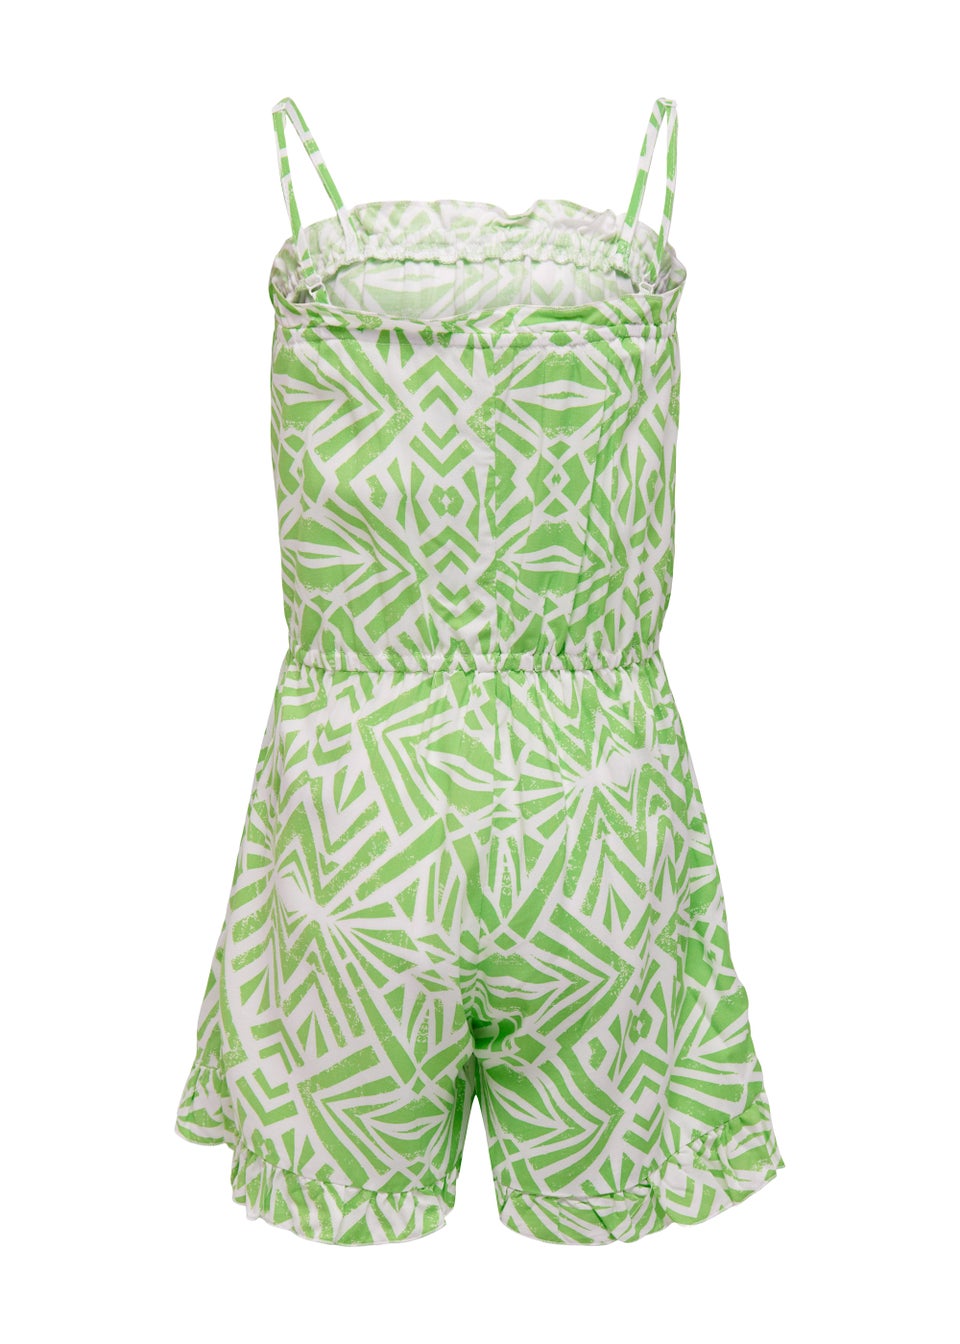 ONLY Kids Green Print Playsuit (6-14yrs)